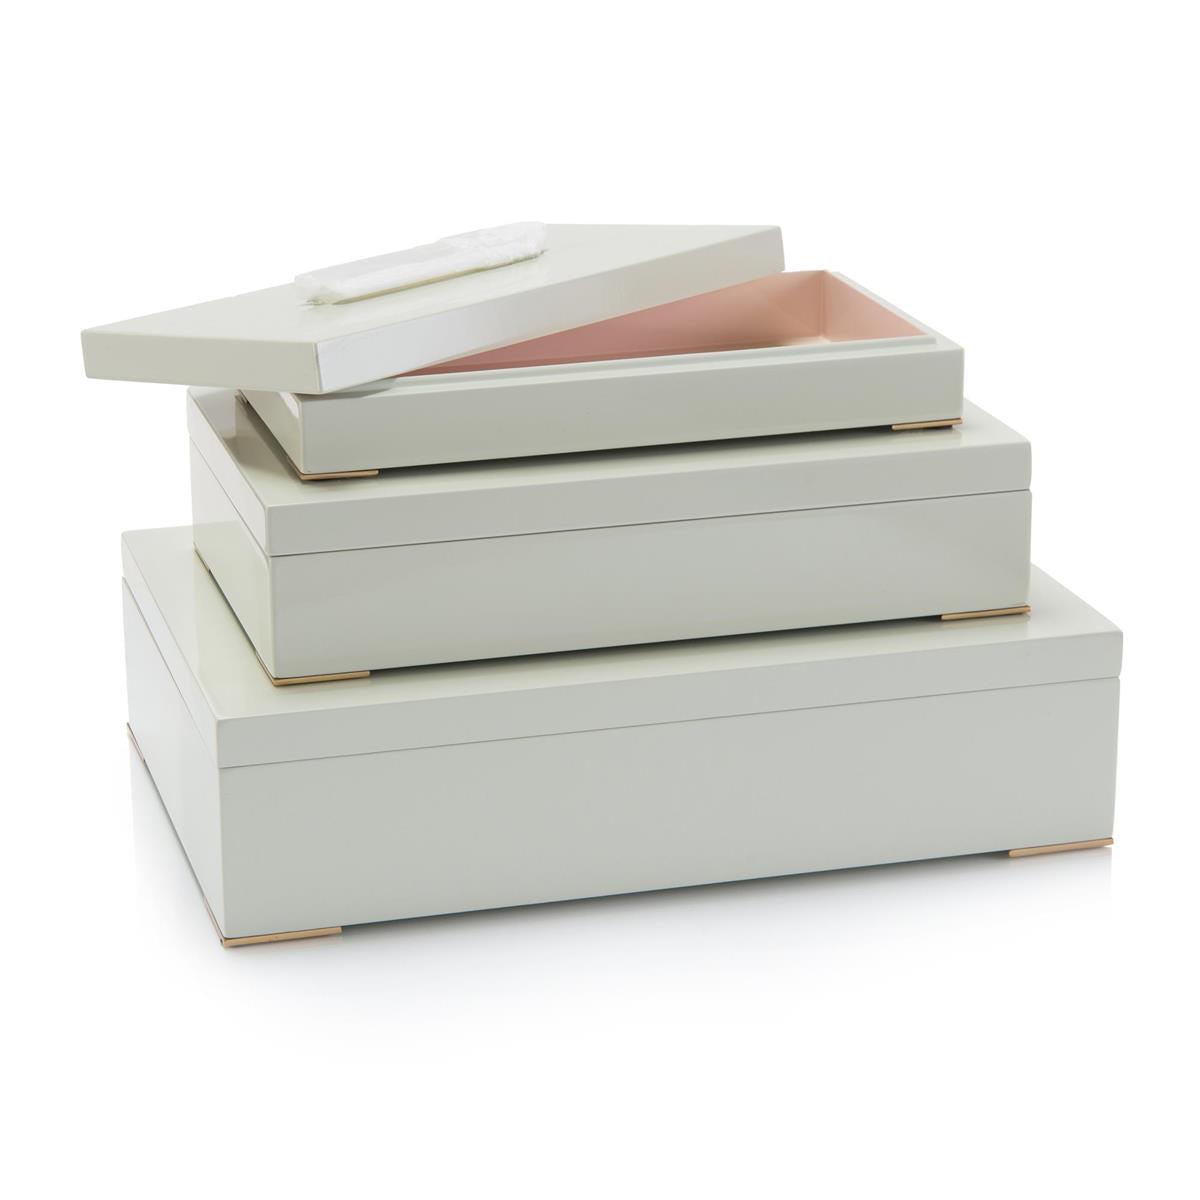 Set of Three Boxes Topped in Selenite-John Richard-Office Accessories-Artistic Elements